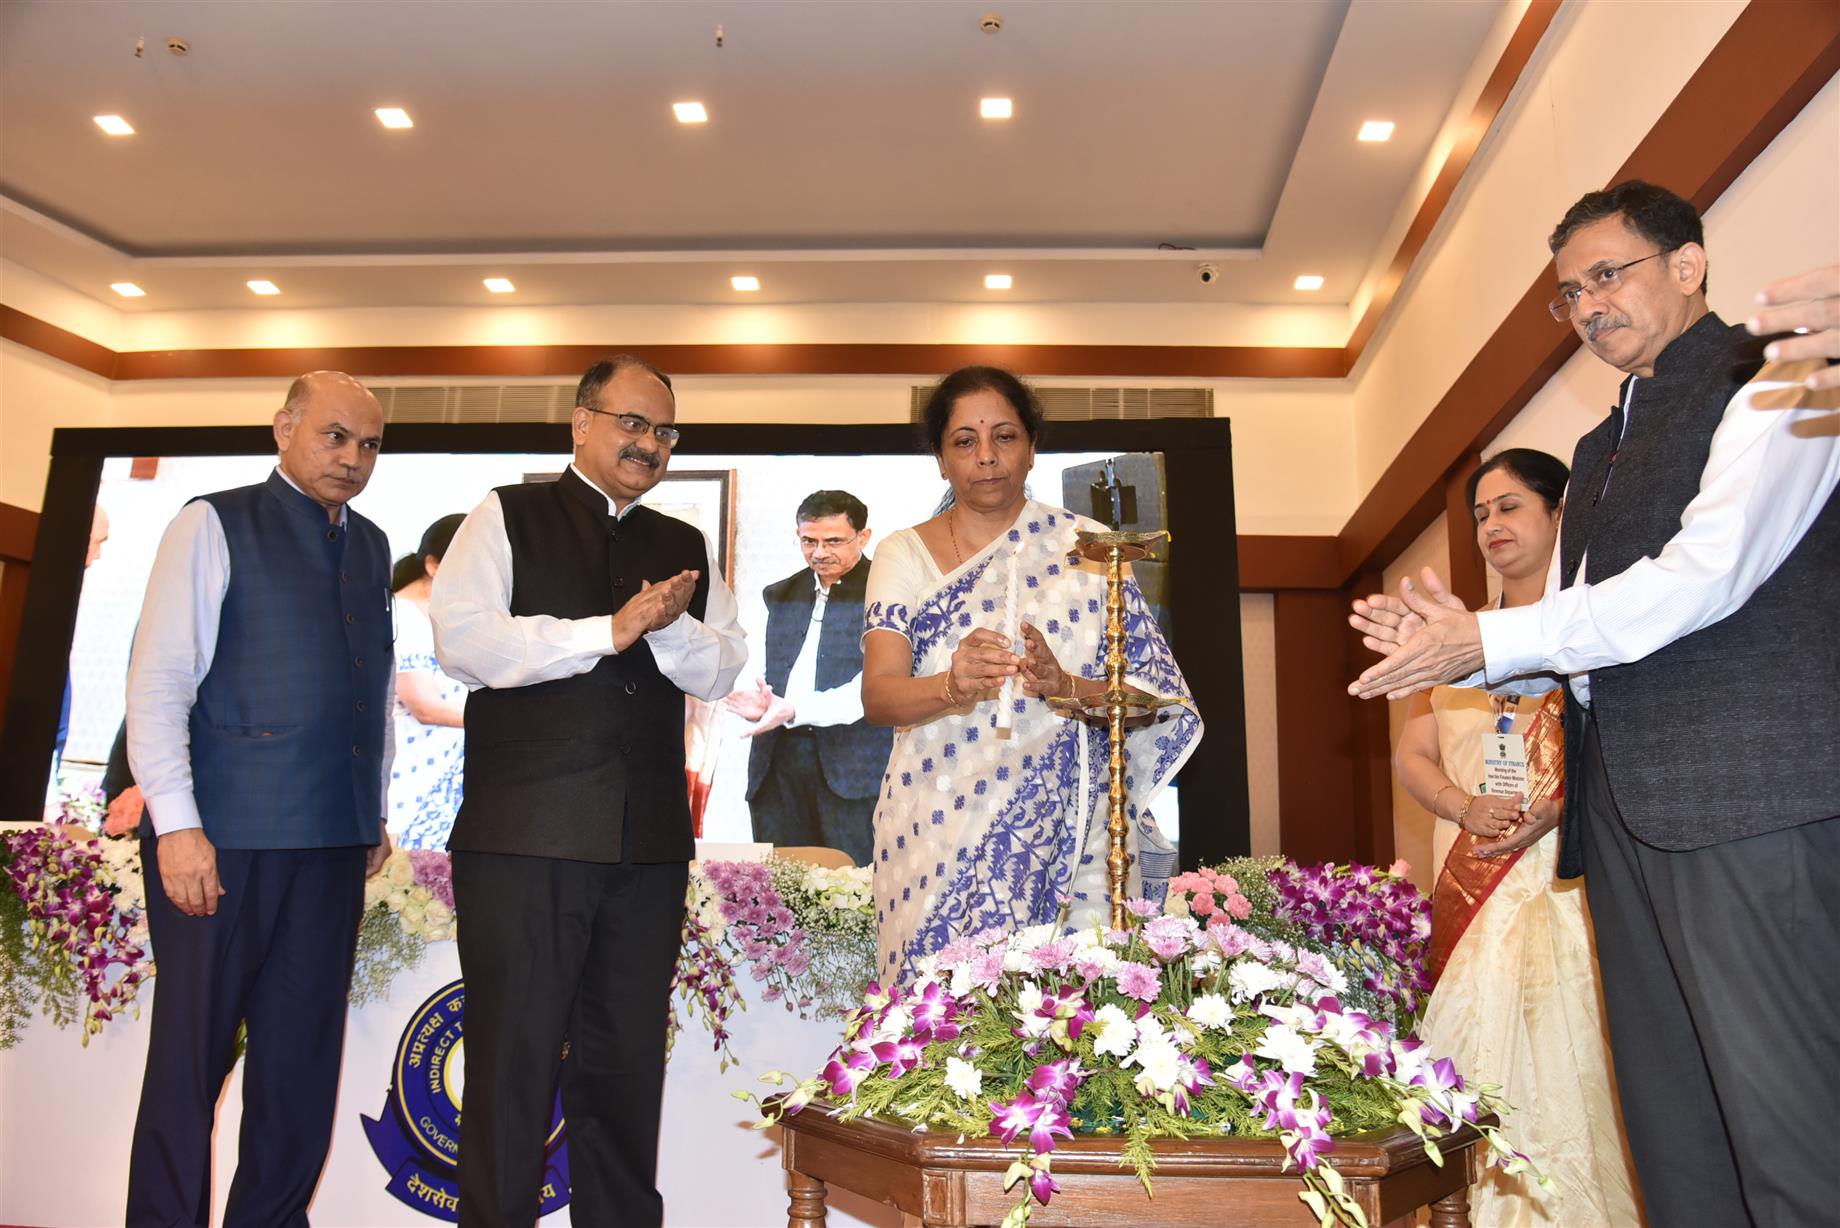 Union Finance Minister, Smt. Nirmala Sitharaman  lightning the lamp to inaugurate interractive session with officers of Department of Revenue in Kolkata on September 06, 2016.  The Revenue Secretary, Shri Ajay Bhushan Pandey, Chairman, CBITC, Shri Pranab Kumar Das and the Chairman CBDT, Shri Pramod Chandra Mody are also seen.